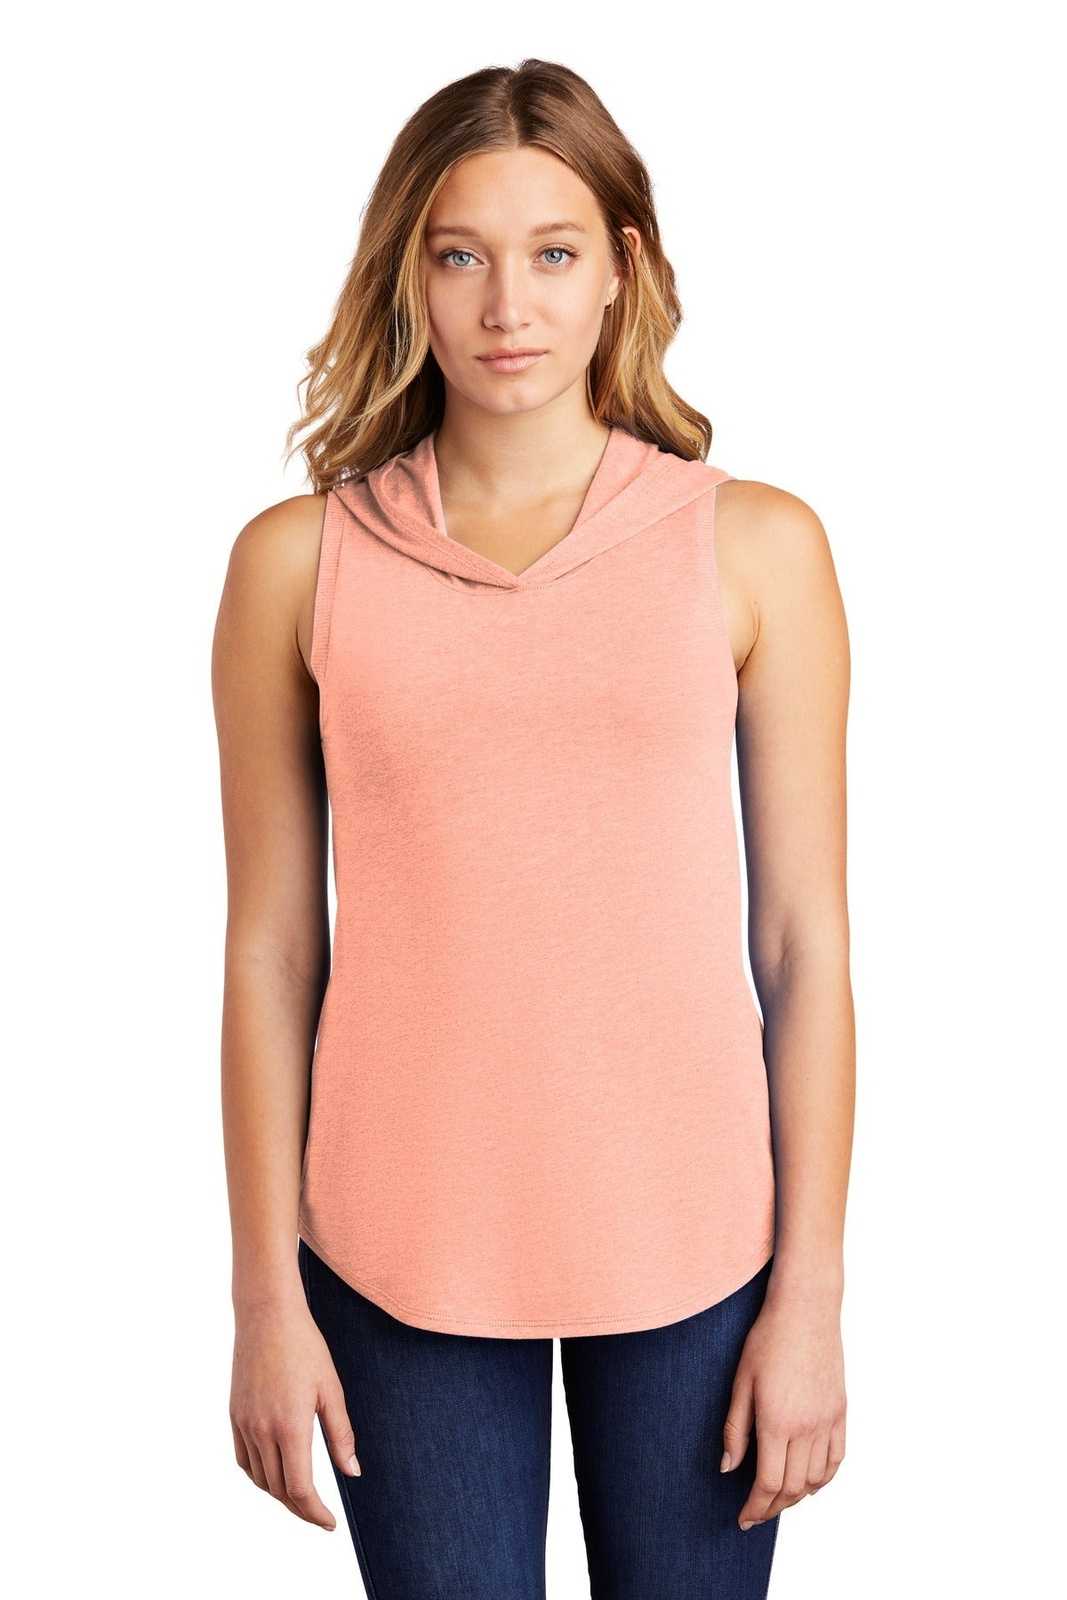 District DT1375 Women's Perfect Tri Sleeveless Hoodie - Heathered Dusty Peach - HIT a Double - 1